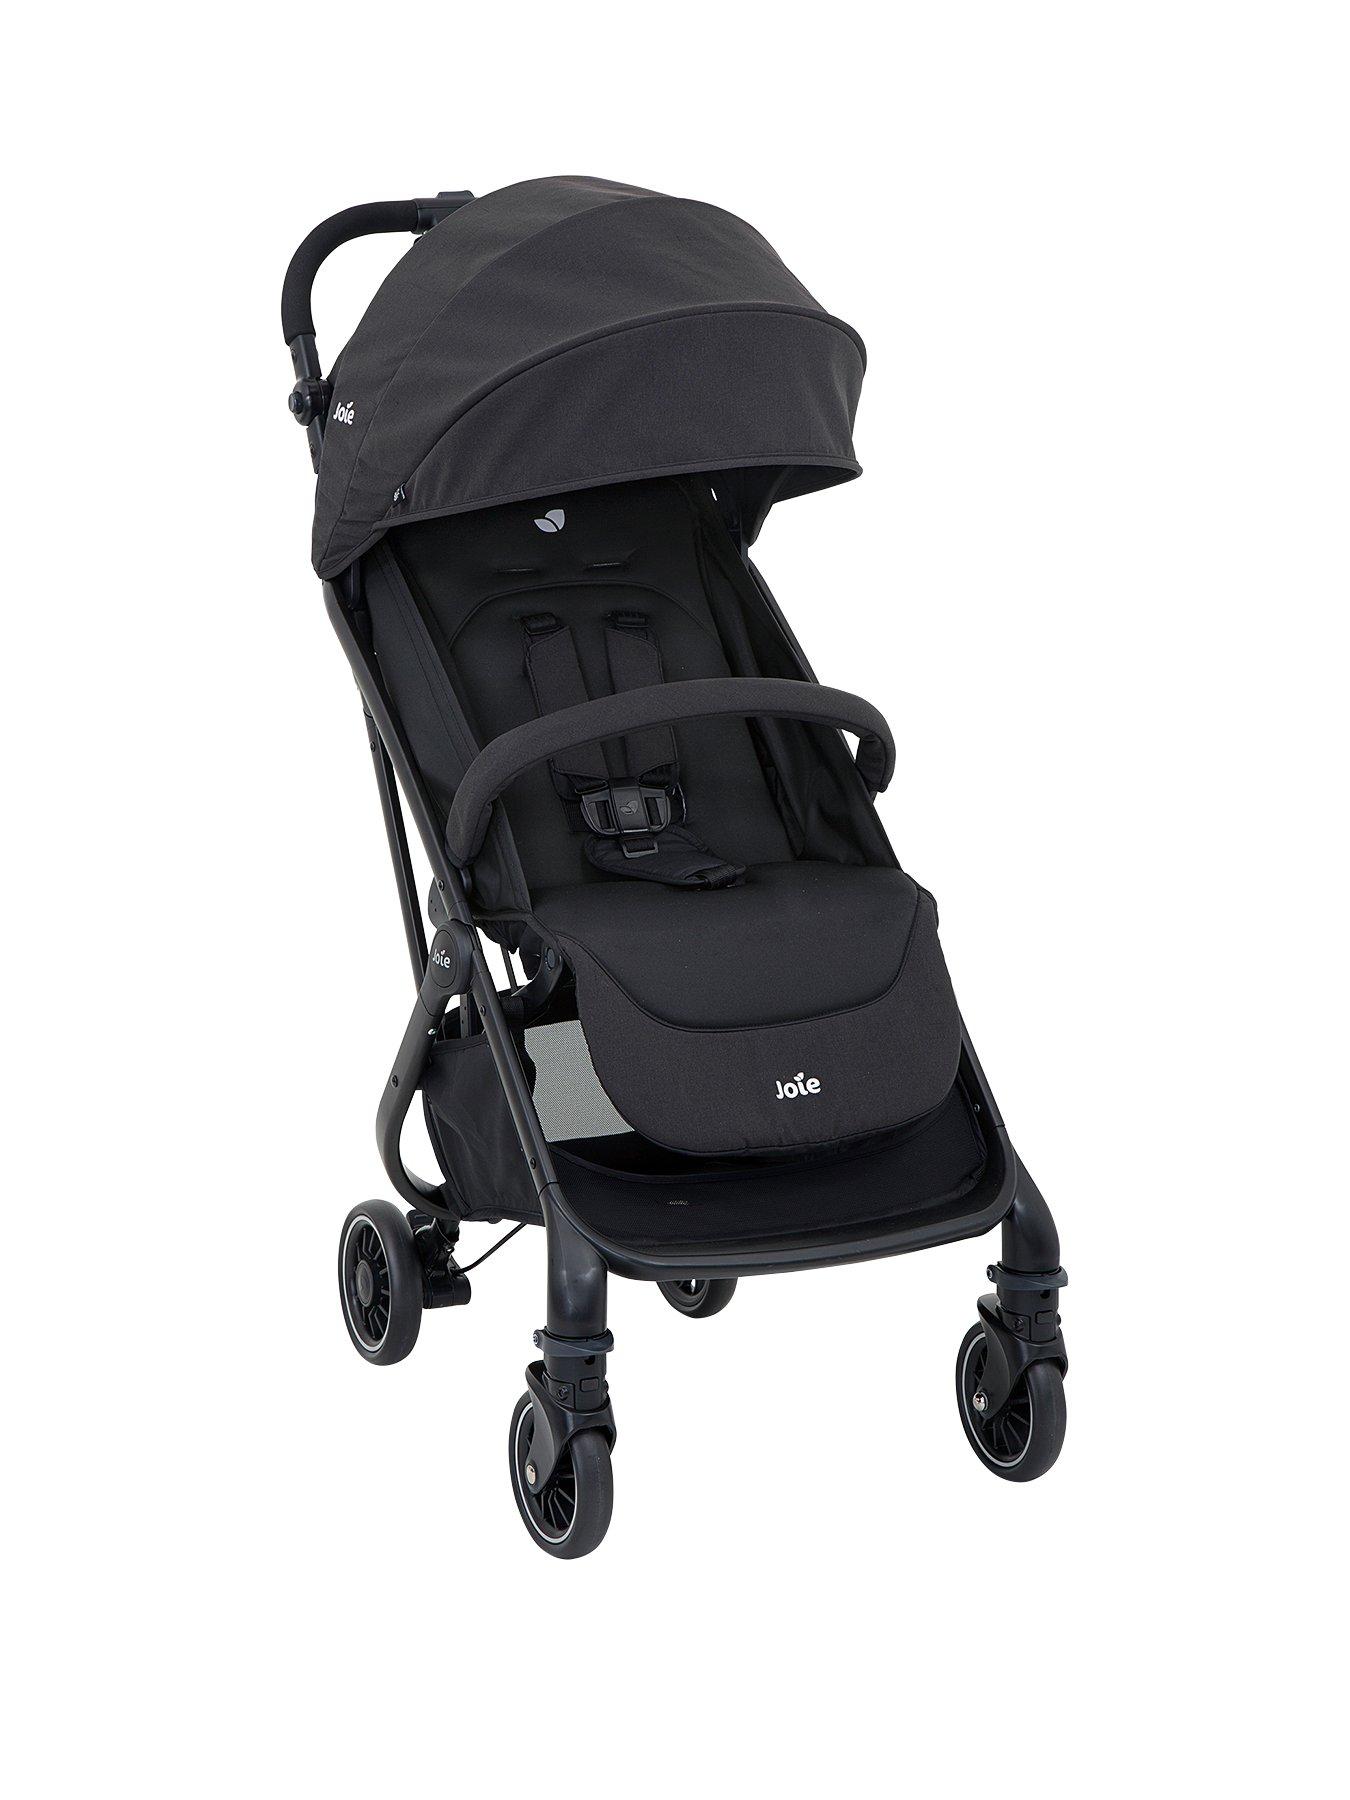 baby one joie buggy